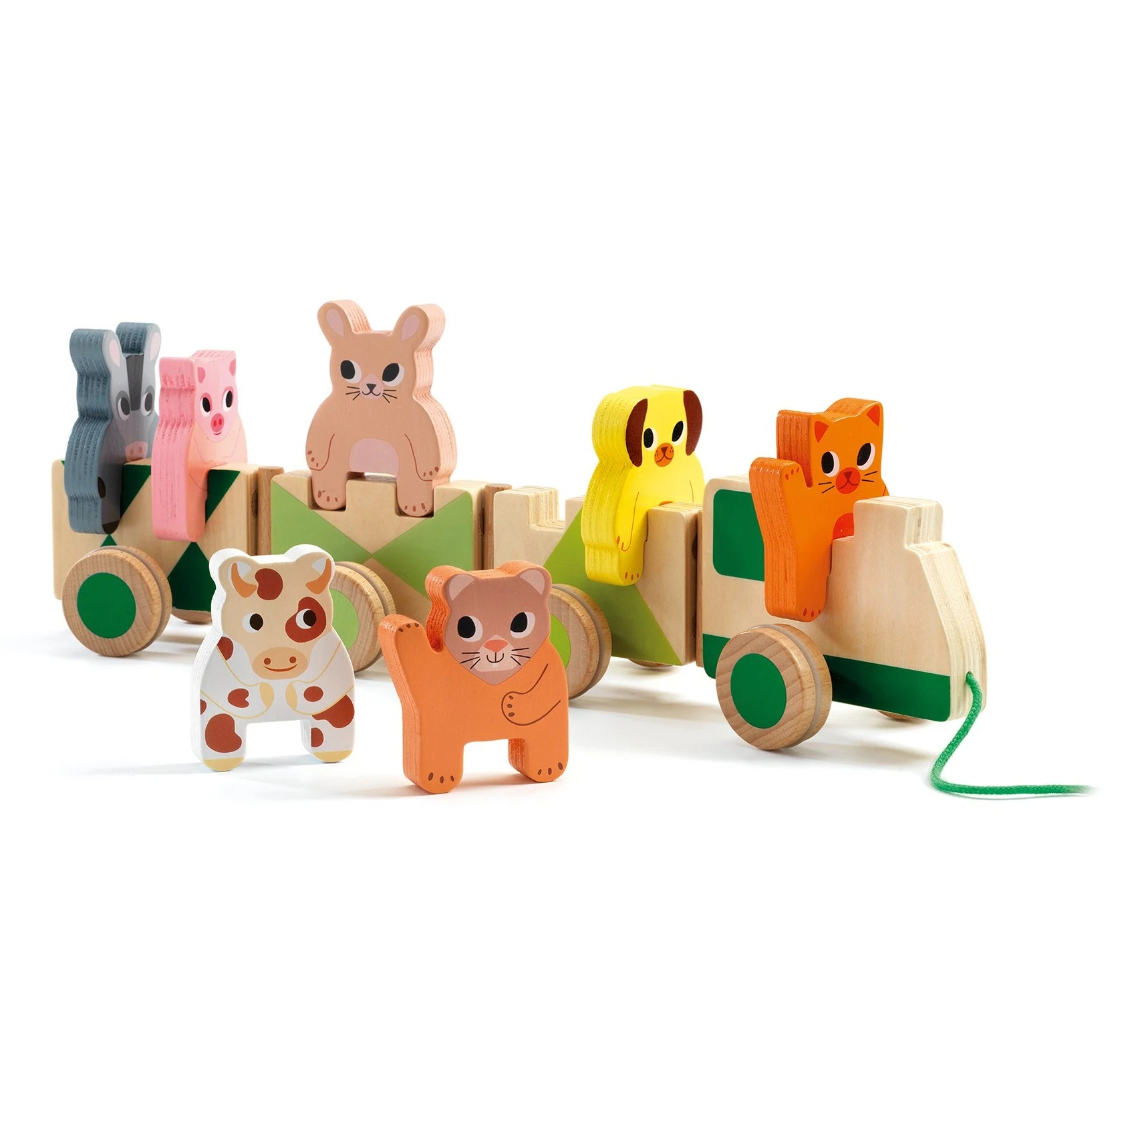 Trainimo Farm Animal Pull-Along Toy - Magpies Paducah